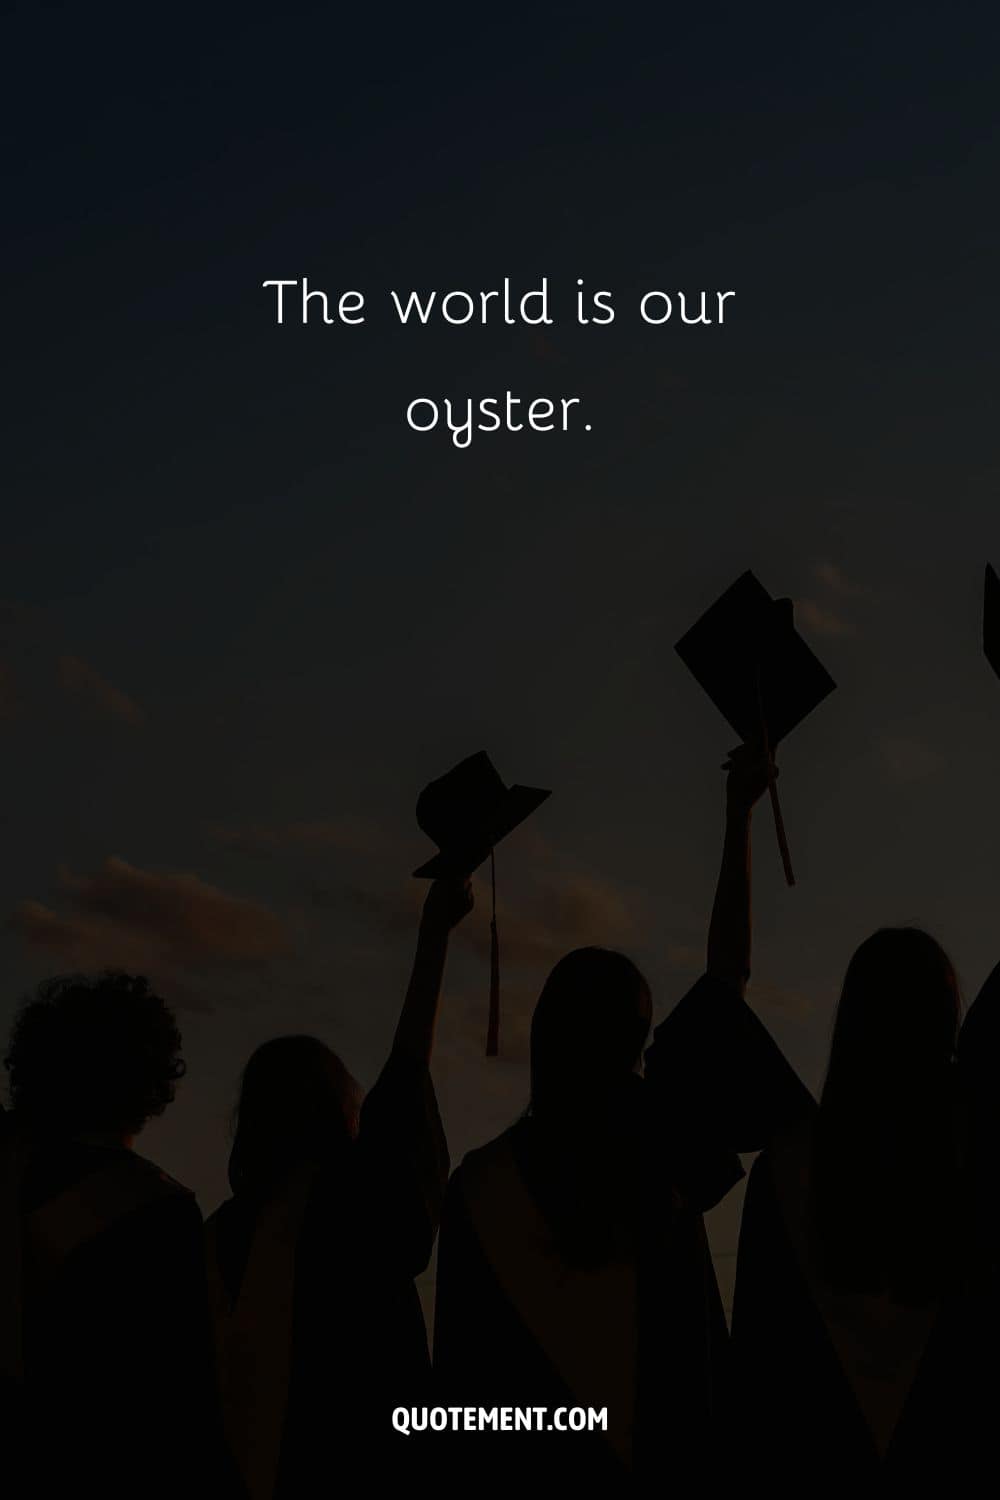 The world is our oyster.